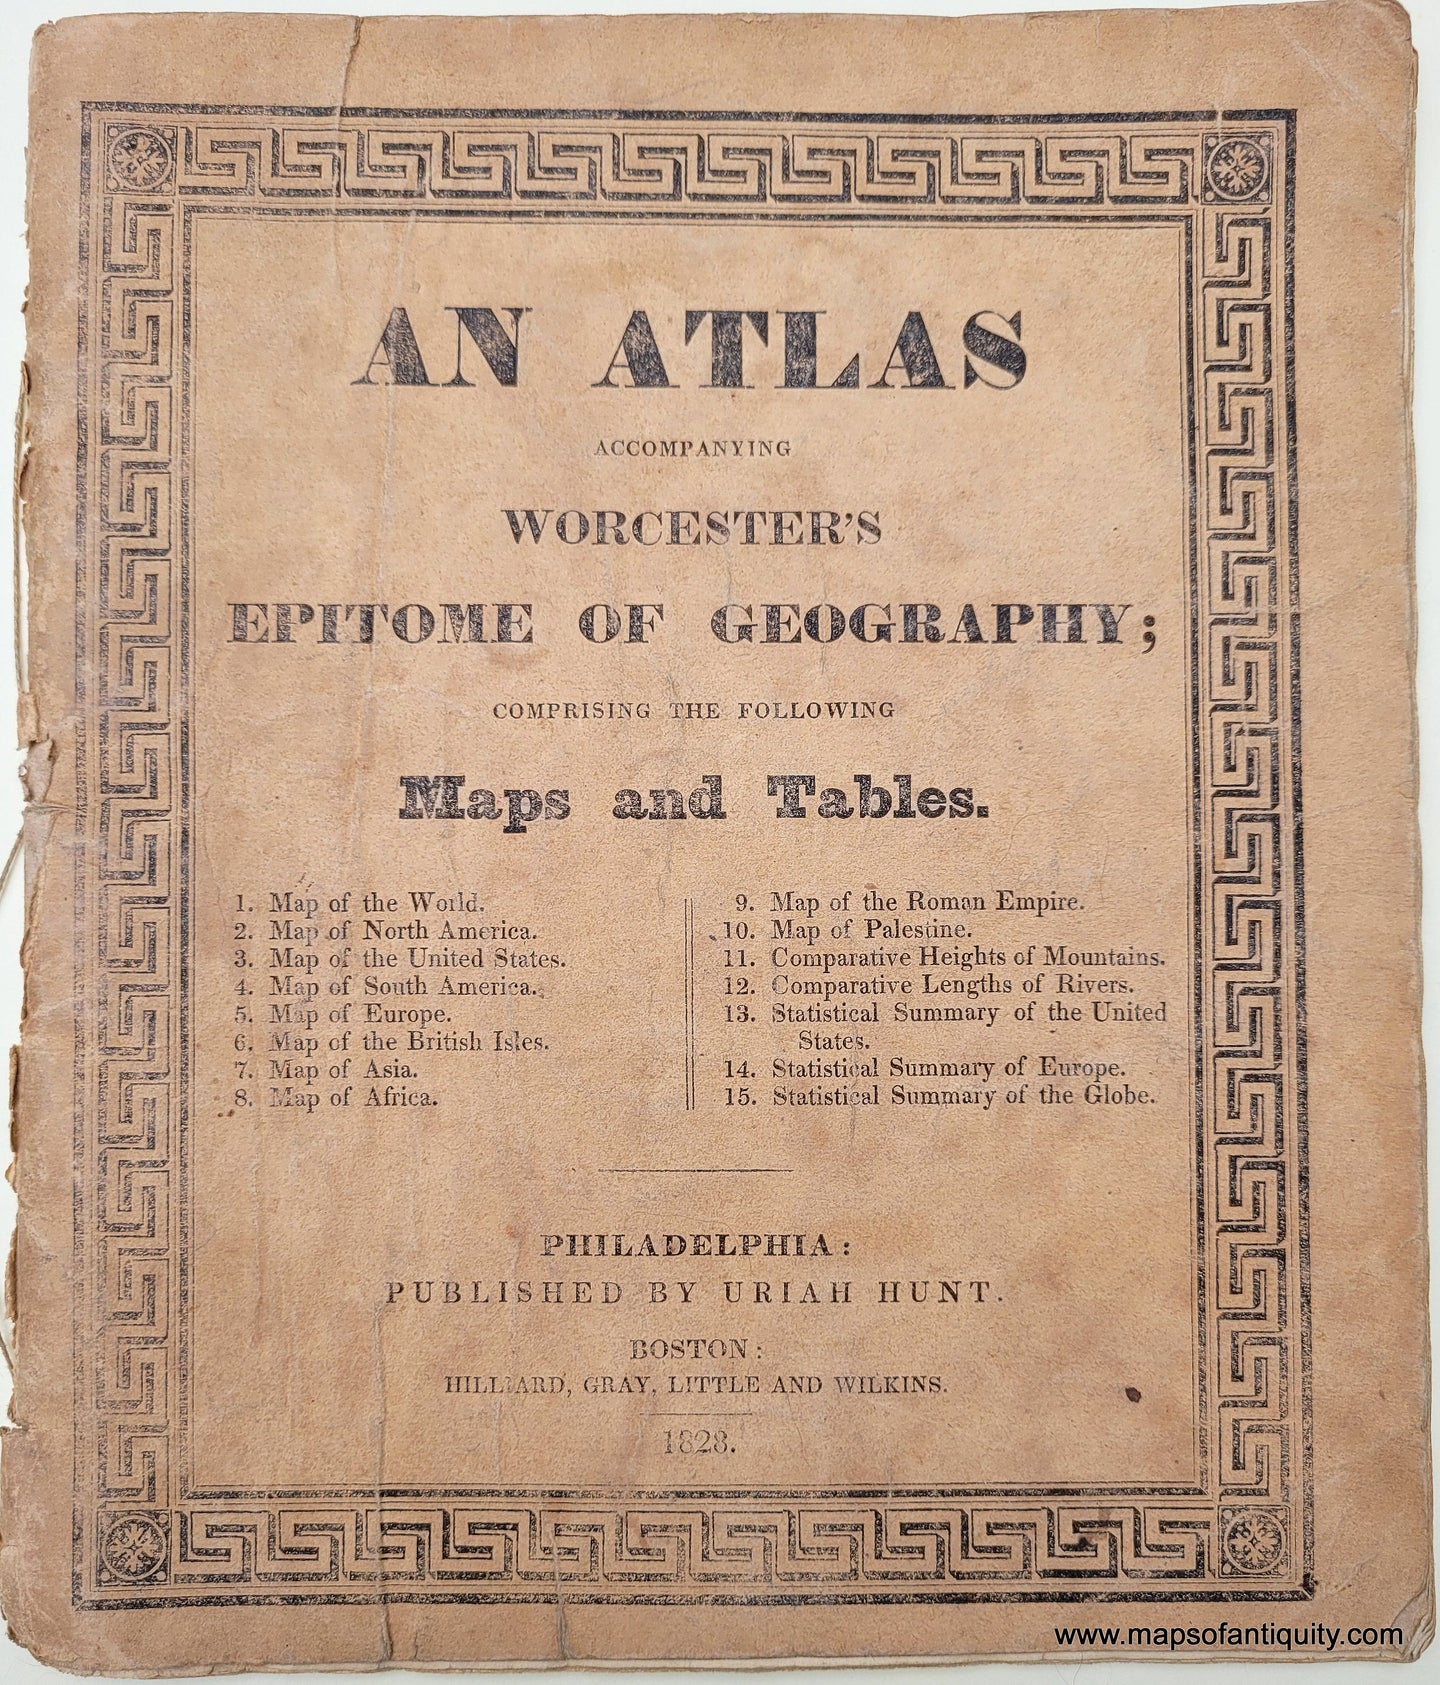 Genuine-Antique-Hand-Colored-Atlas-An-Atlas-accompanying-Worcesters-Epitome-of-Geography-1828-Hunt-Maps-Of-Antiquity